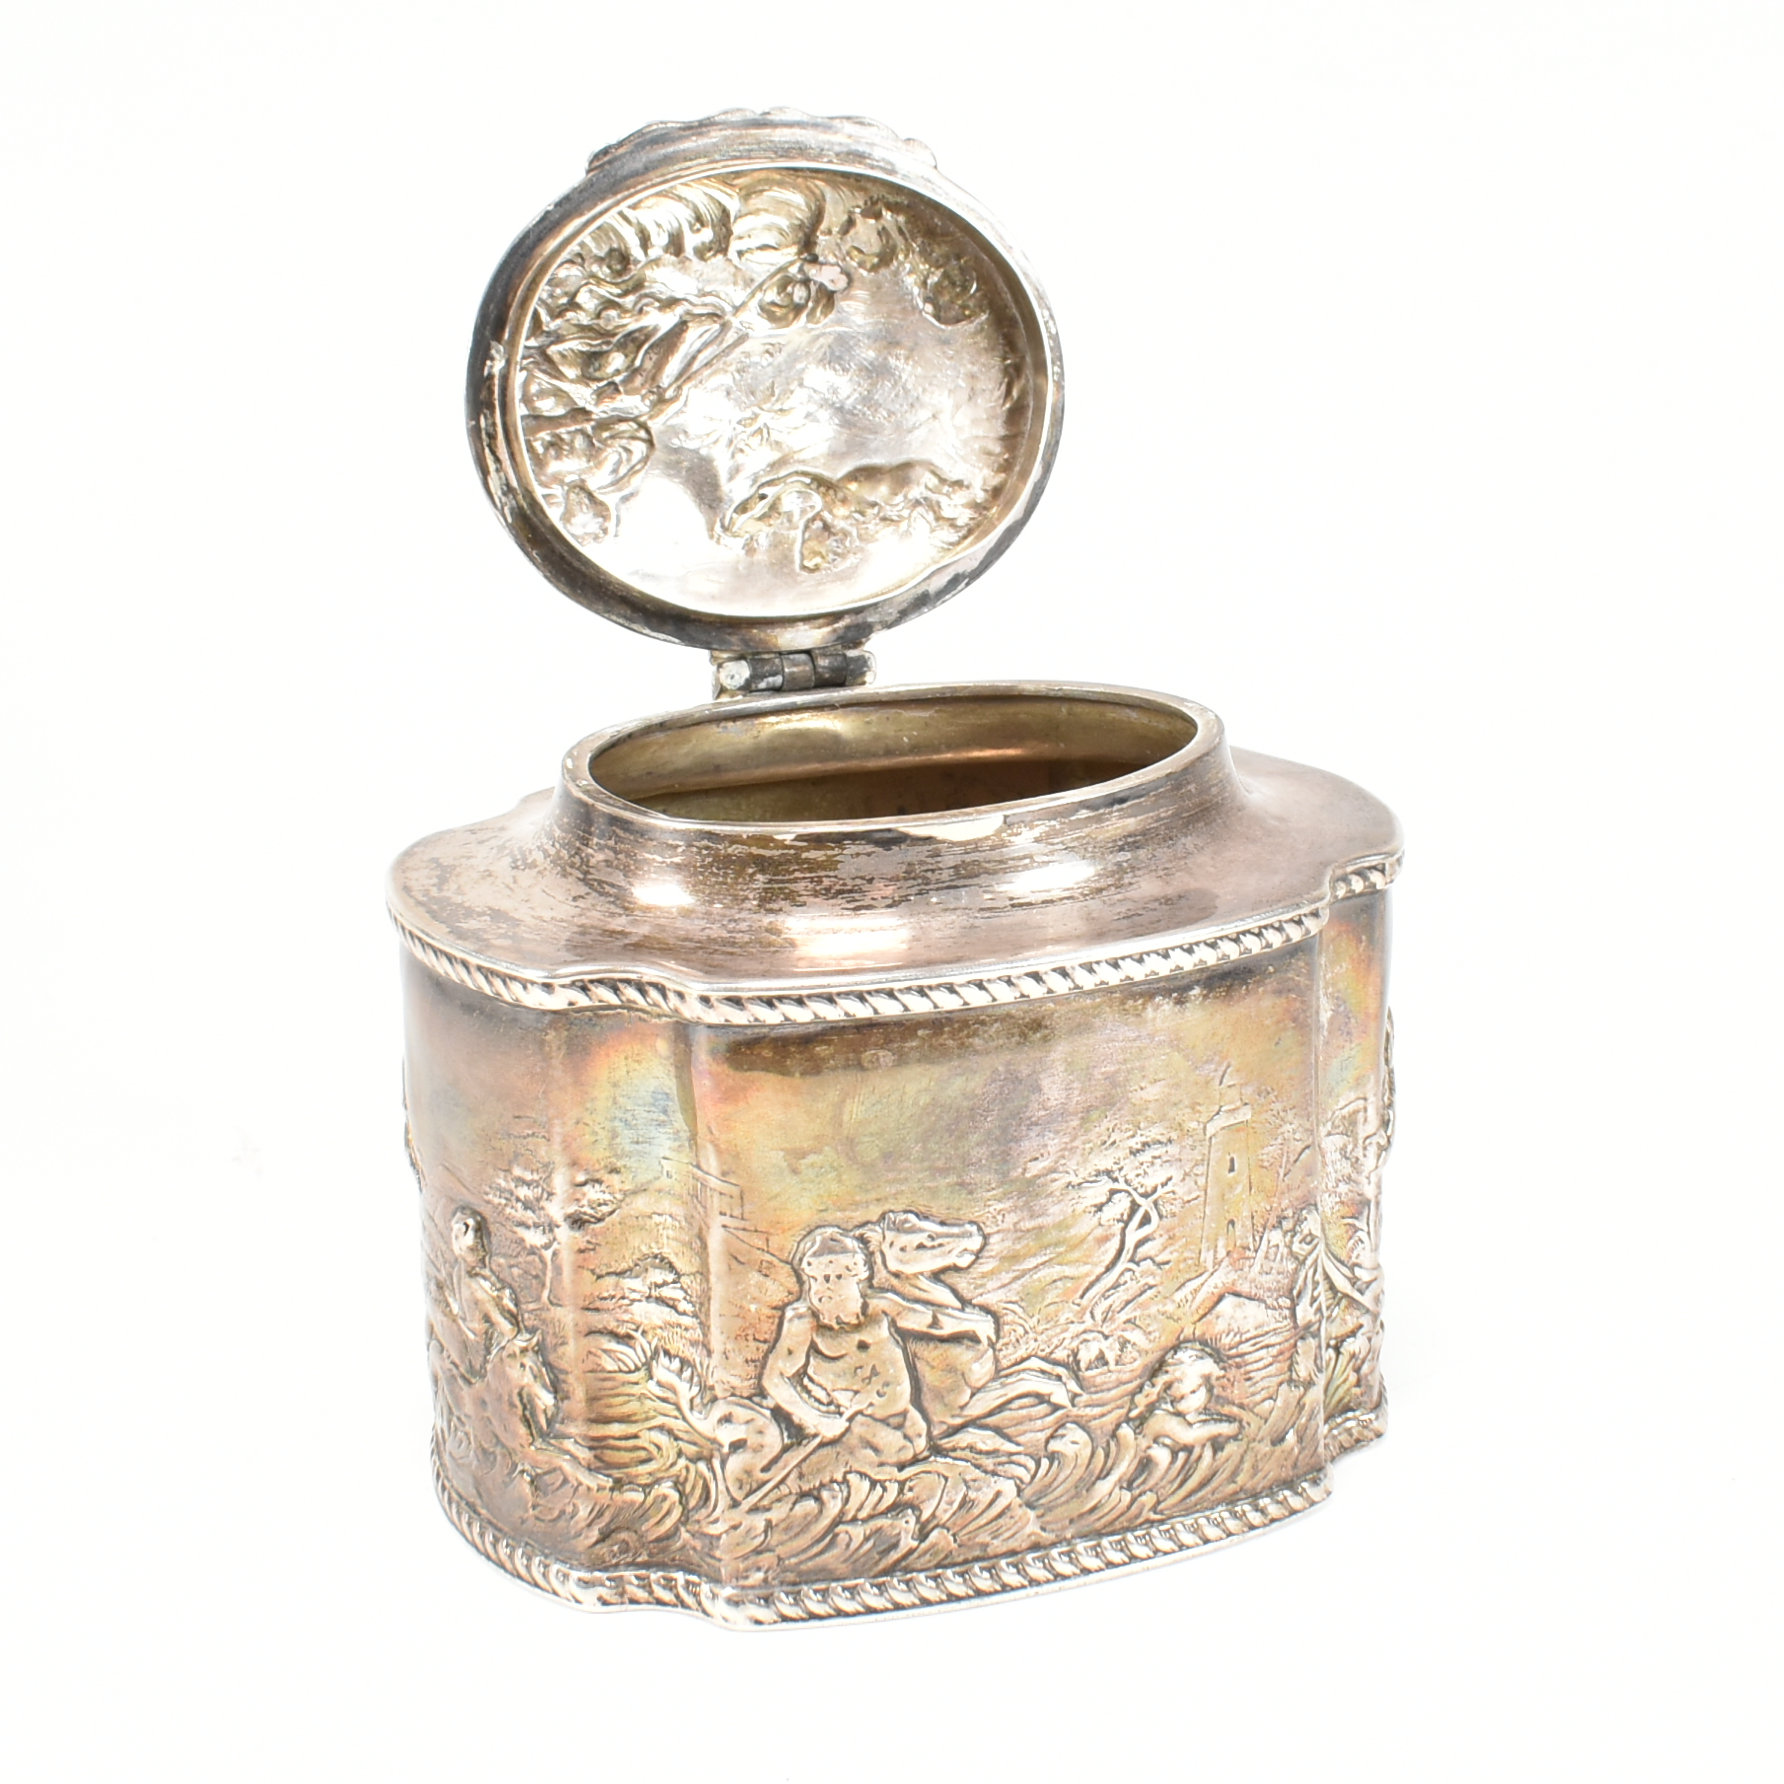 LATE VICTORIAN HALLMARKED SILVER TEA CADDY - Image 6 of 9